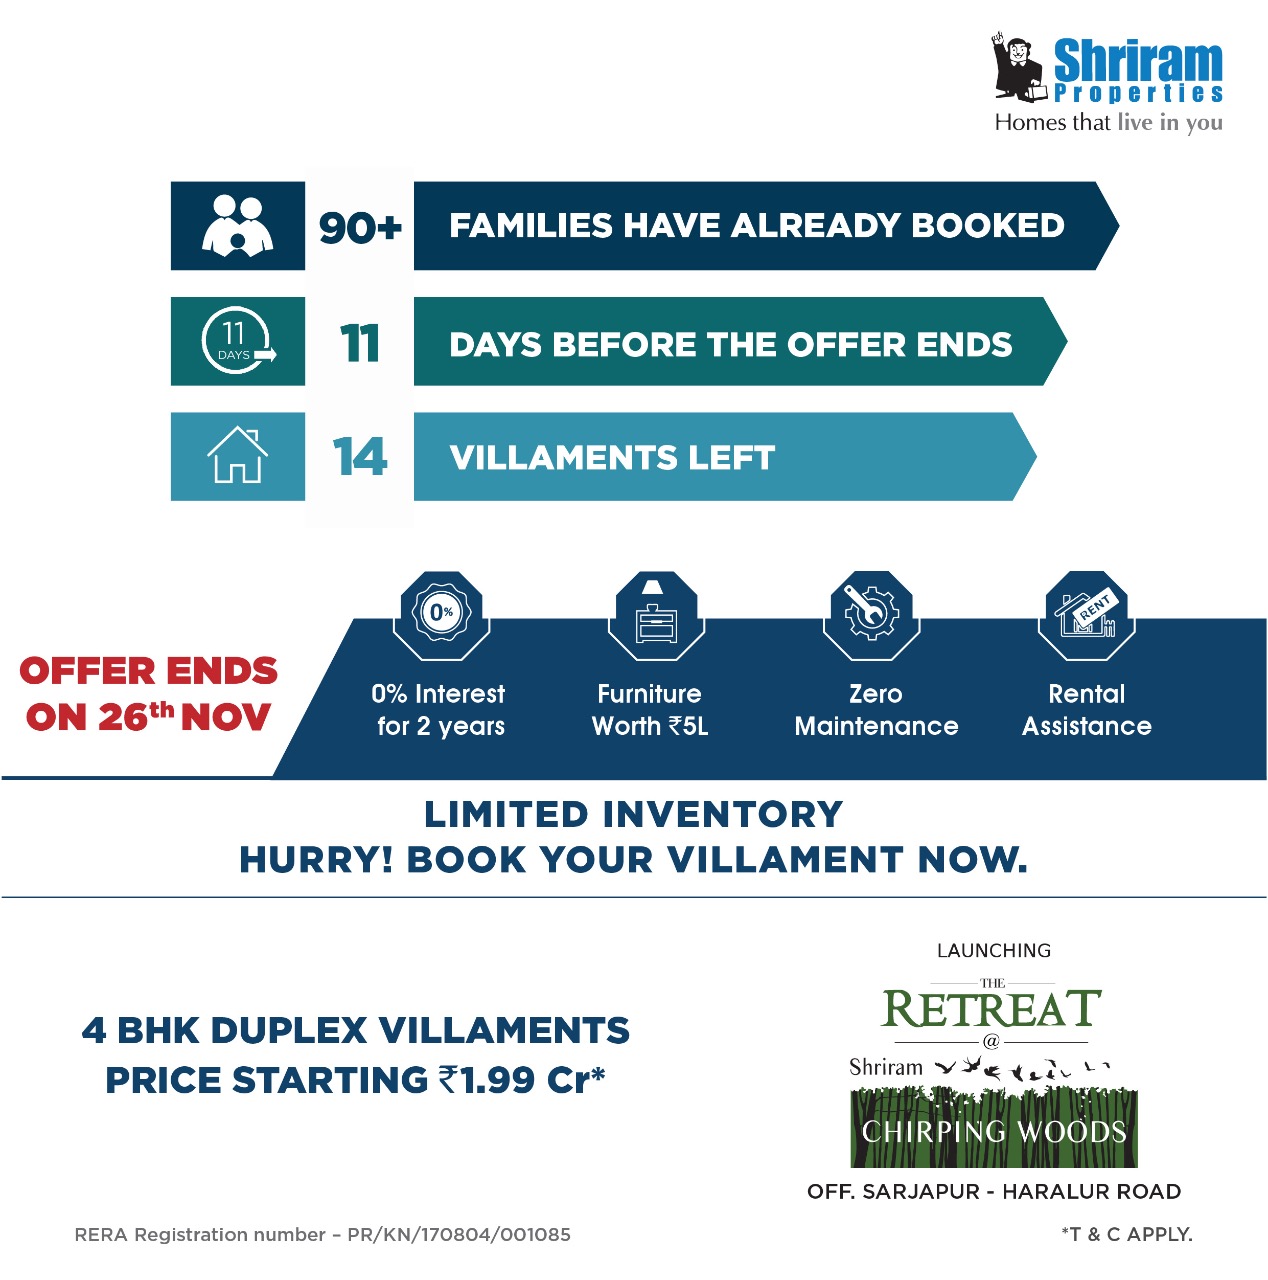 Book your villaments now before the offer ends at Shriram Chirping Woods in Bangalore